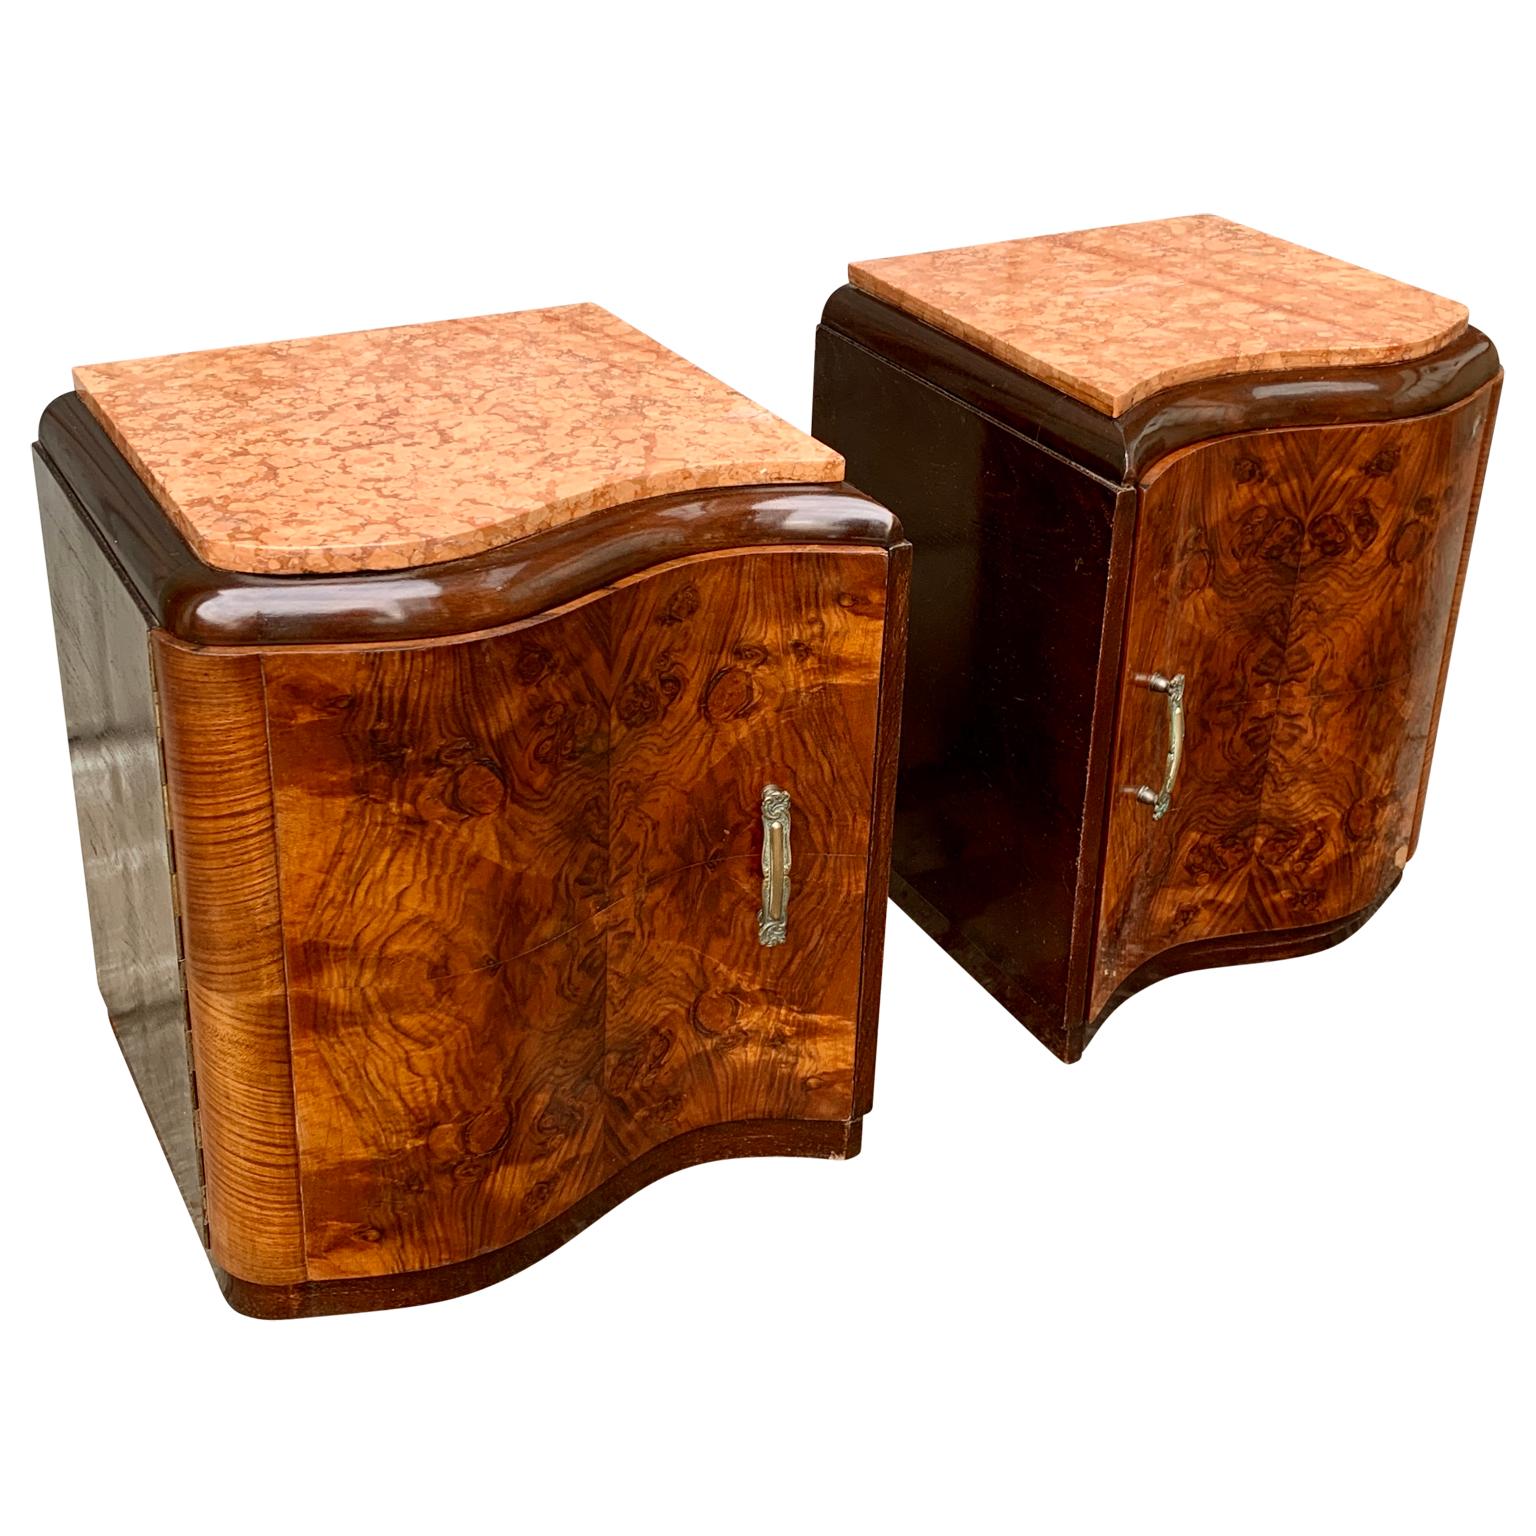 Veneer Pair of French Art Deco Nightstands in Walnut And Pink Travertine For Sale